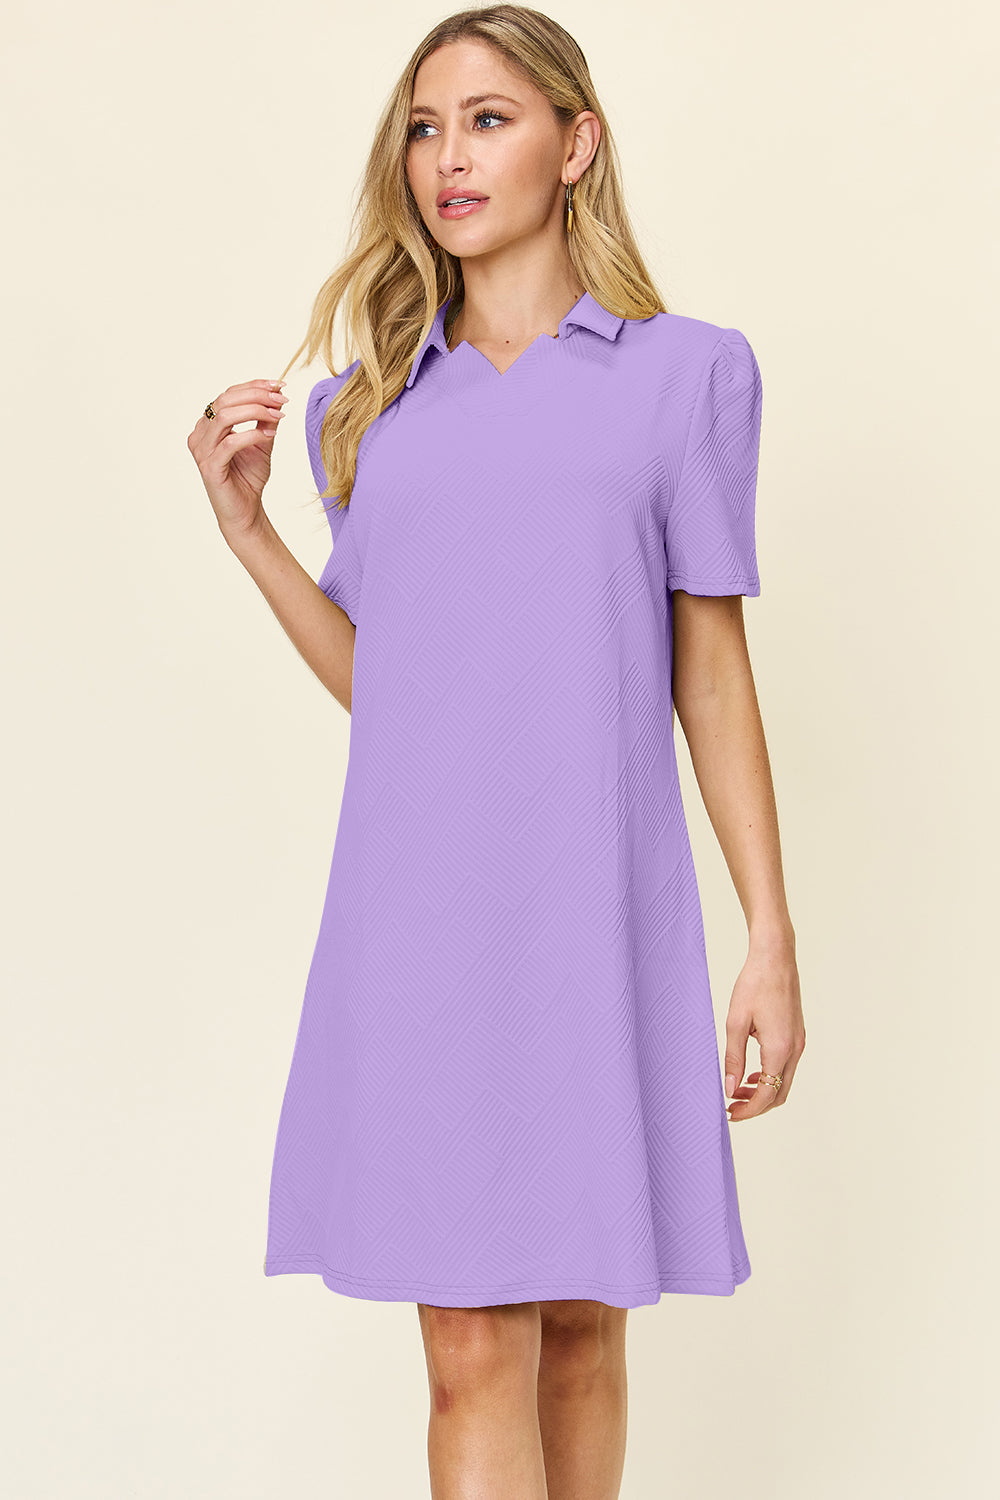 Double Take Full Size Texture Collared Neck Short Sleeve Dress Lavender